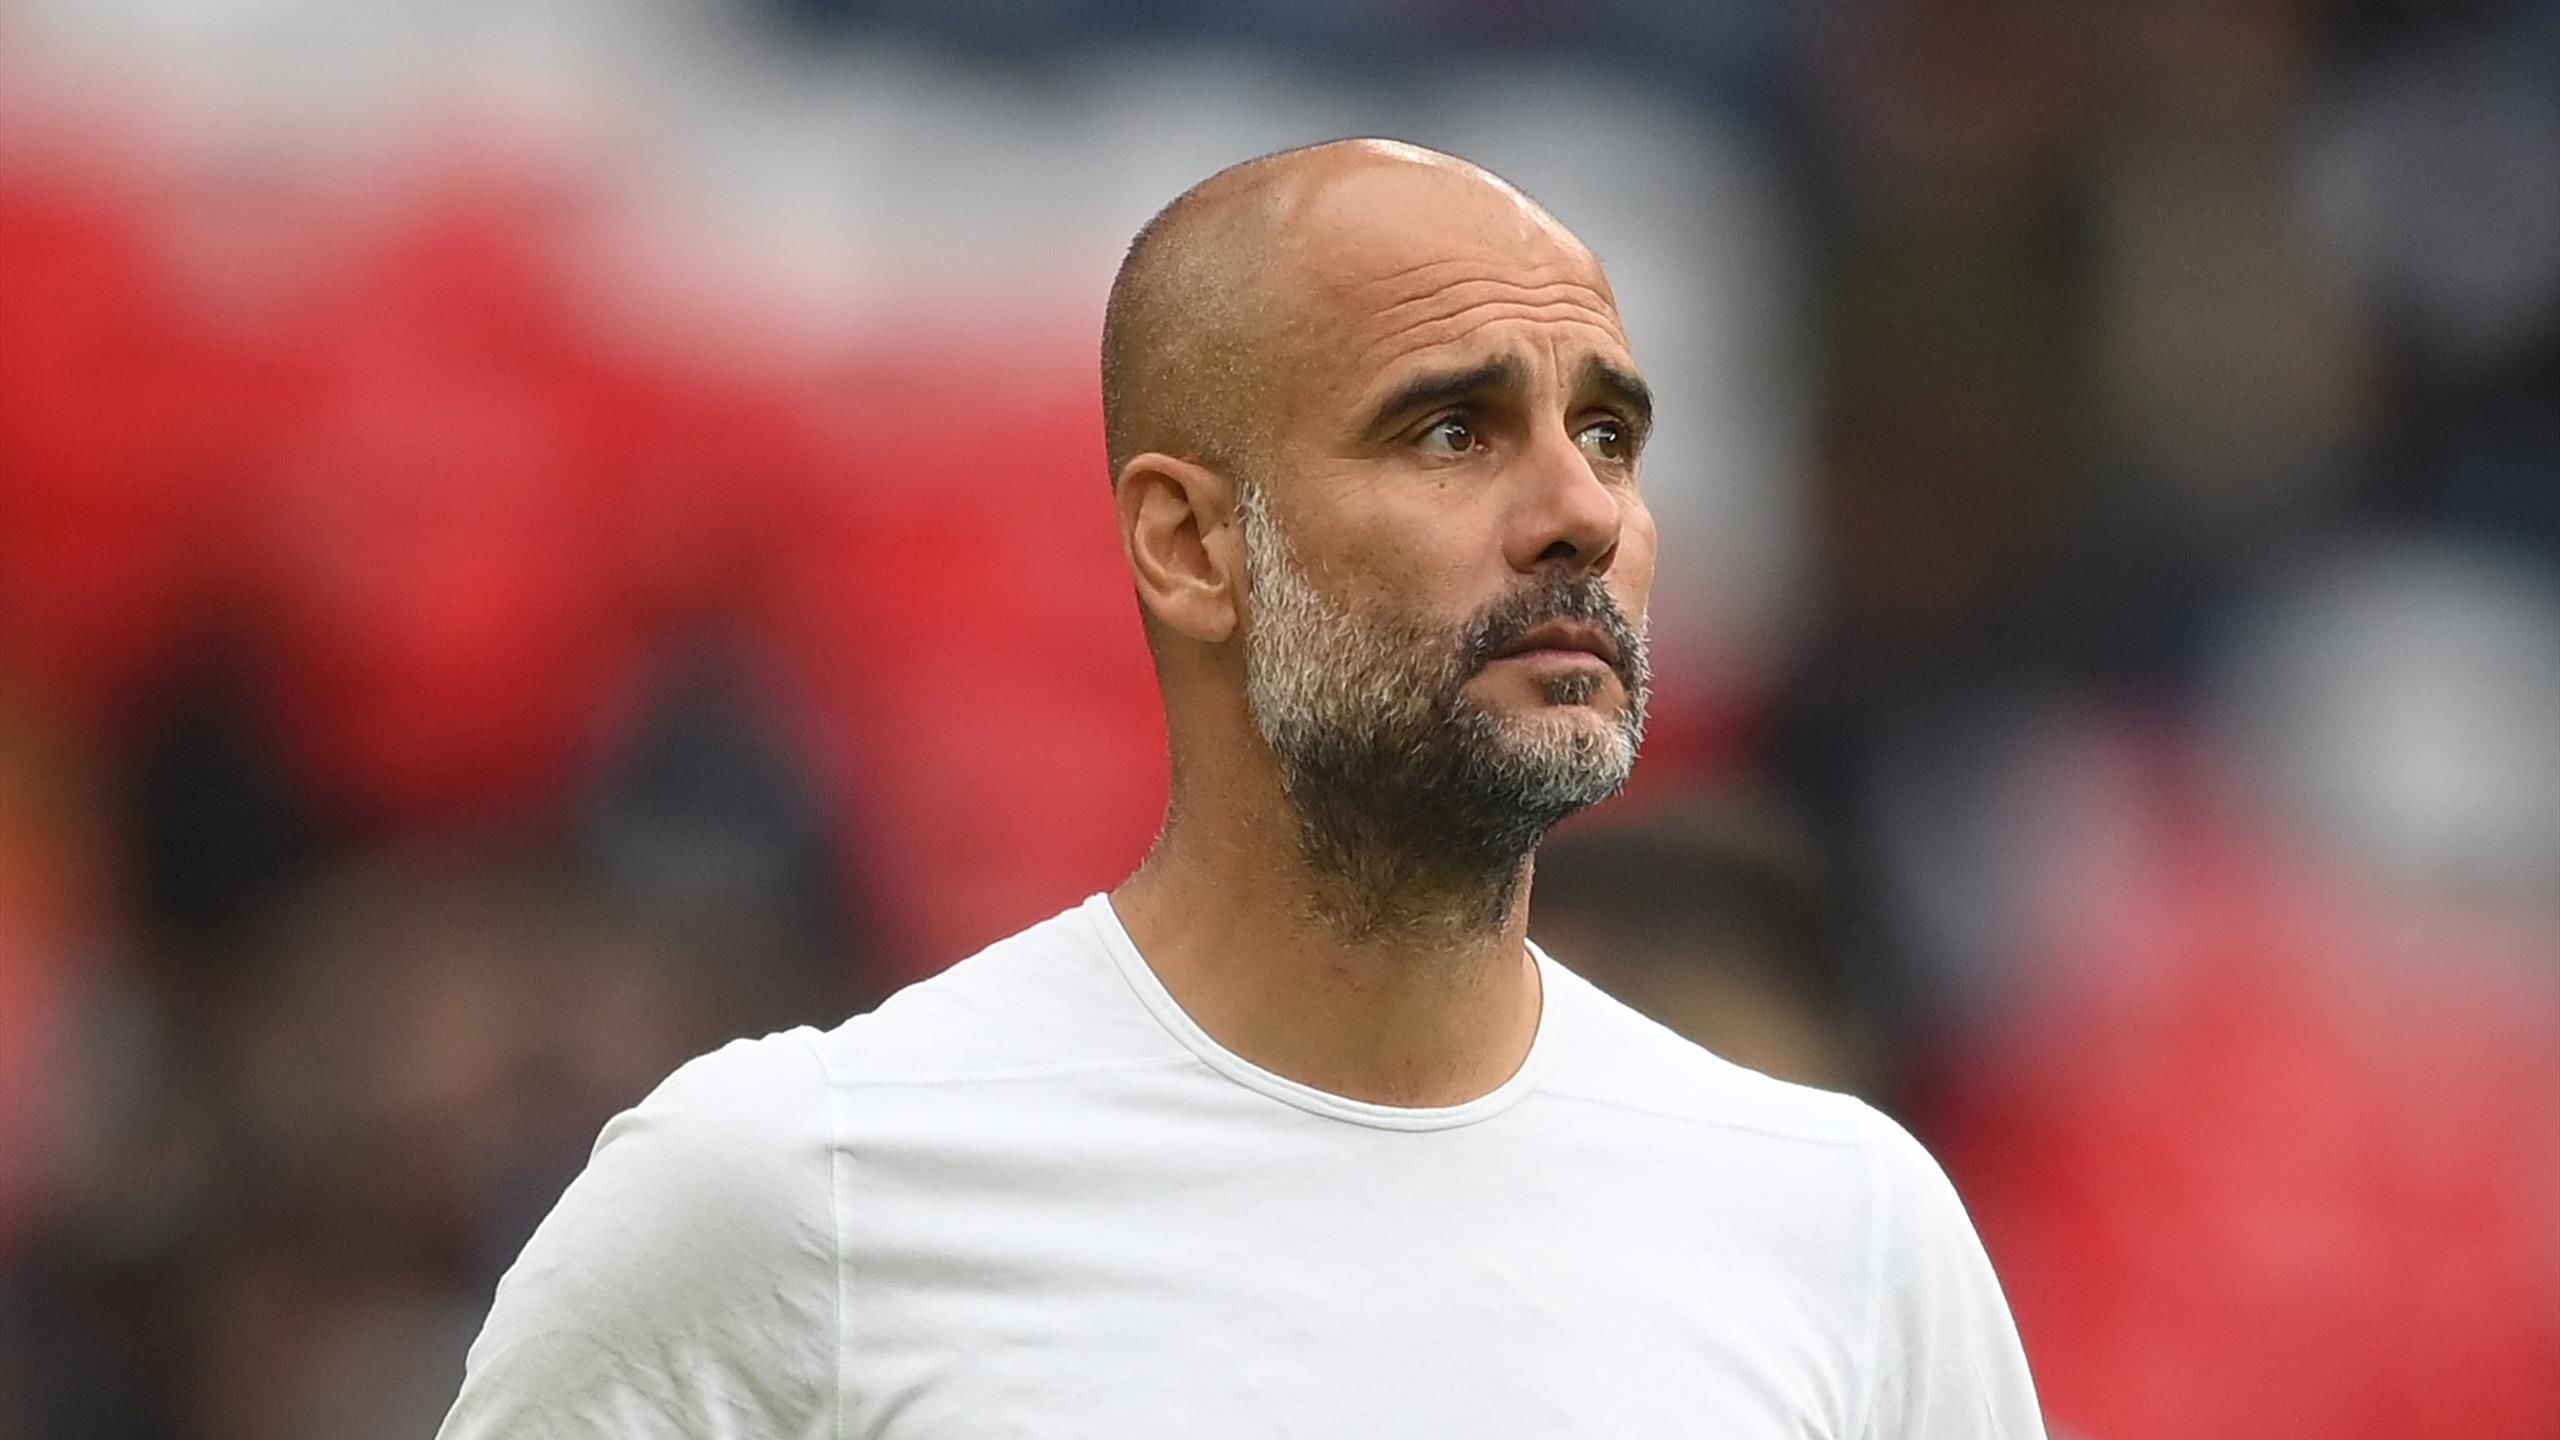 Man City expects Guardiola to leave before sanctions imposed on club